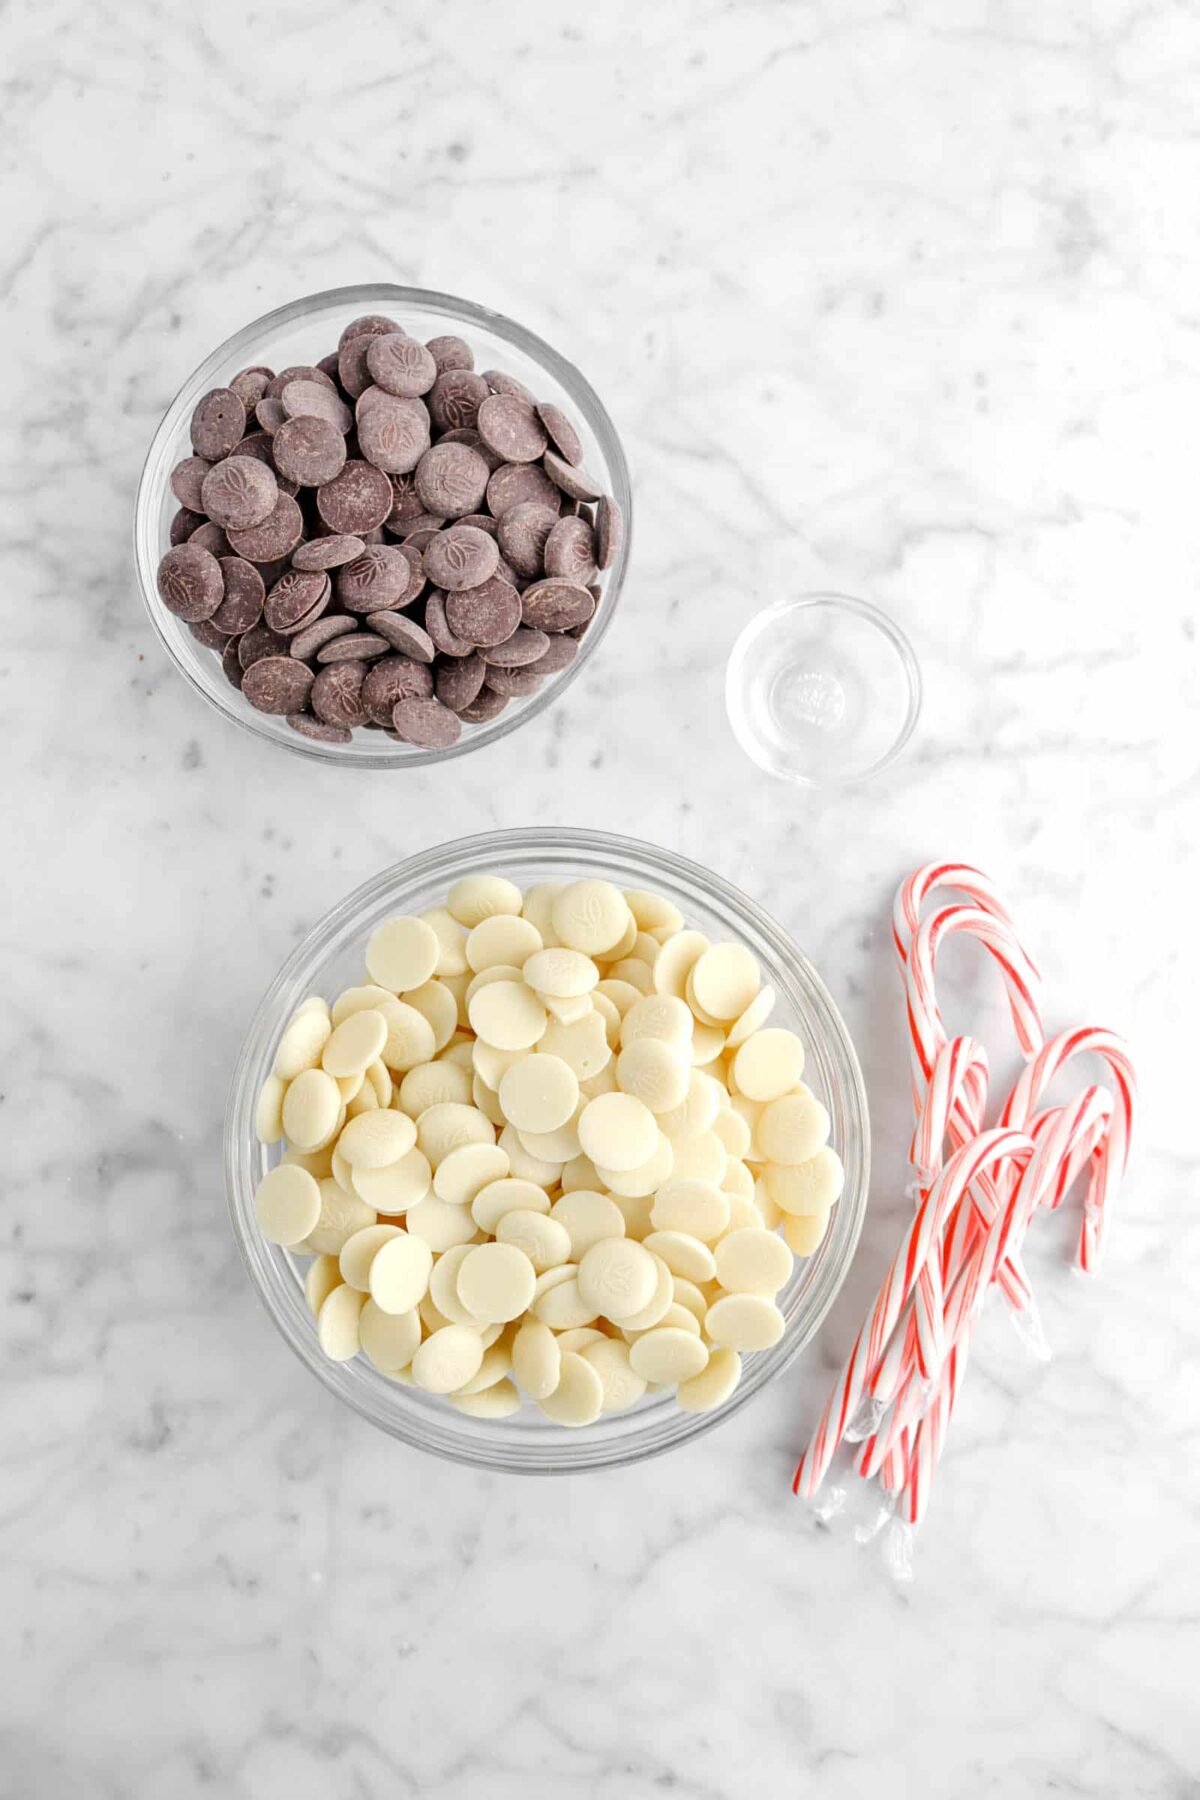 bowl of dark chocolate, bowl of white chocolate, peppermint oil in small bowl, and candy canes on marble counter